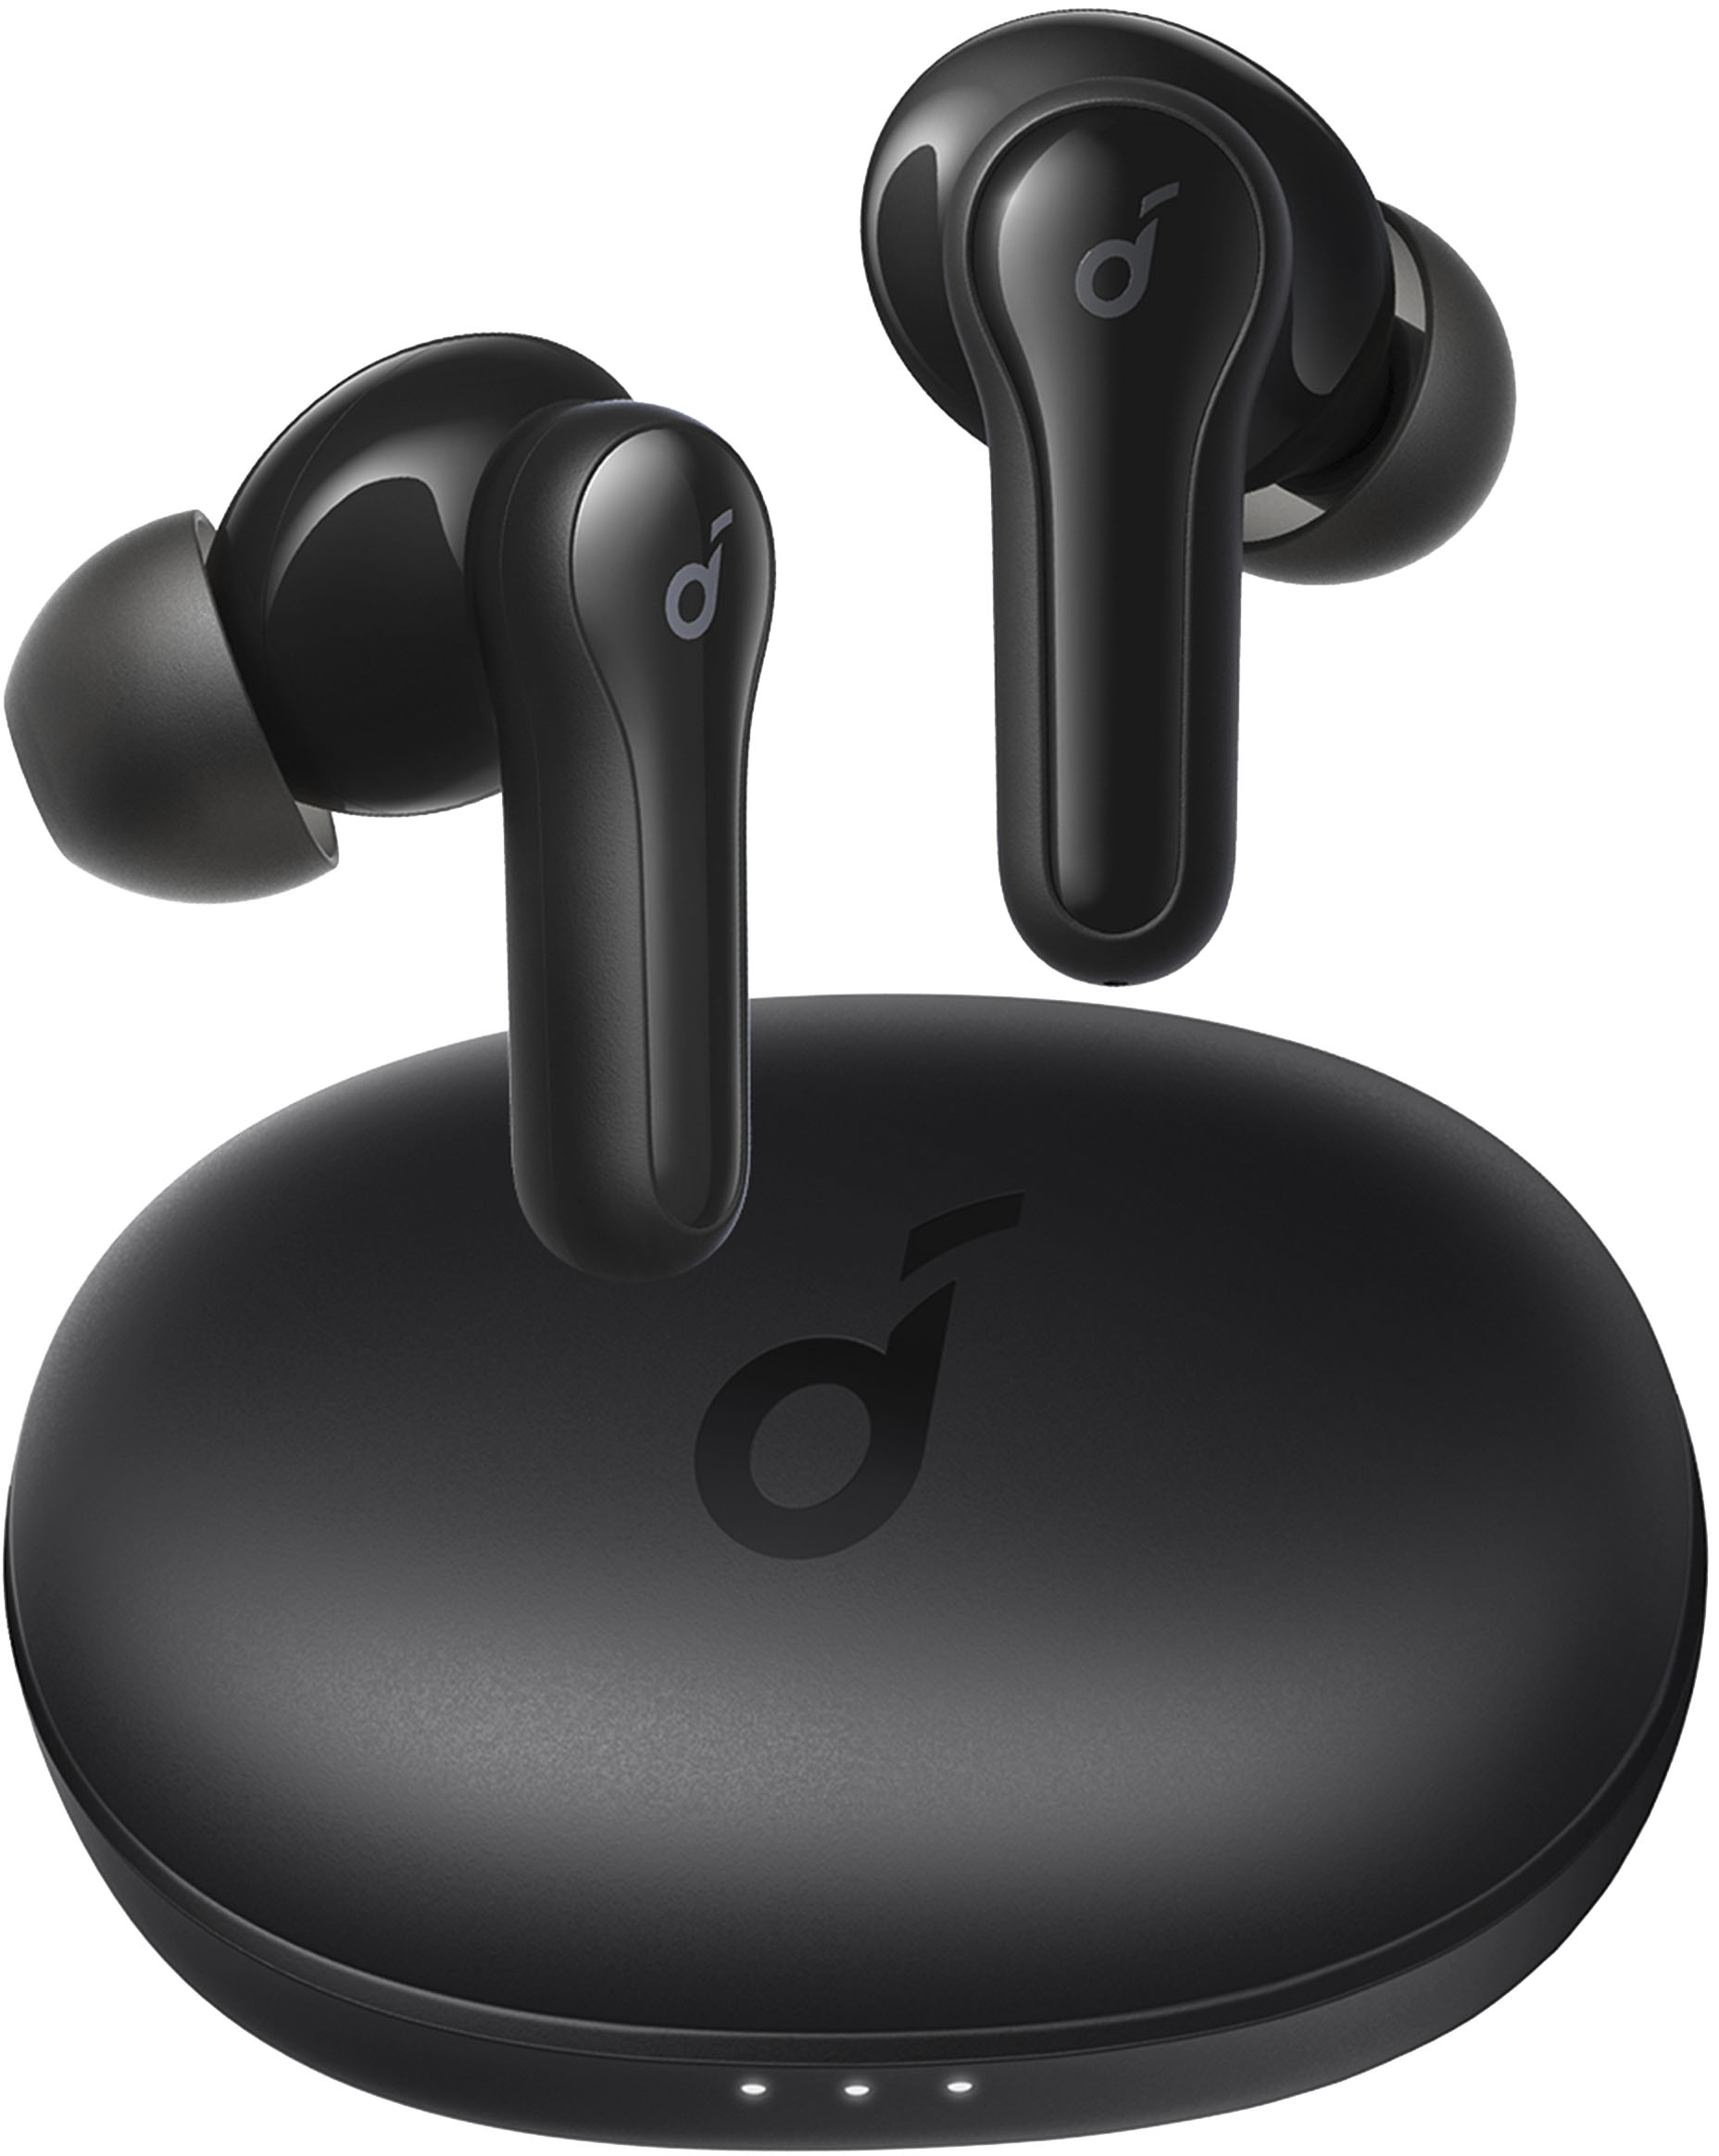 Which wireless earbuds of soundcore are best? — Sound core Christmas sale 2022